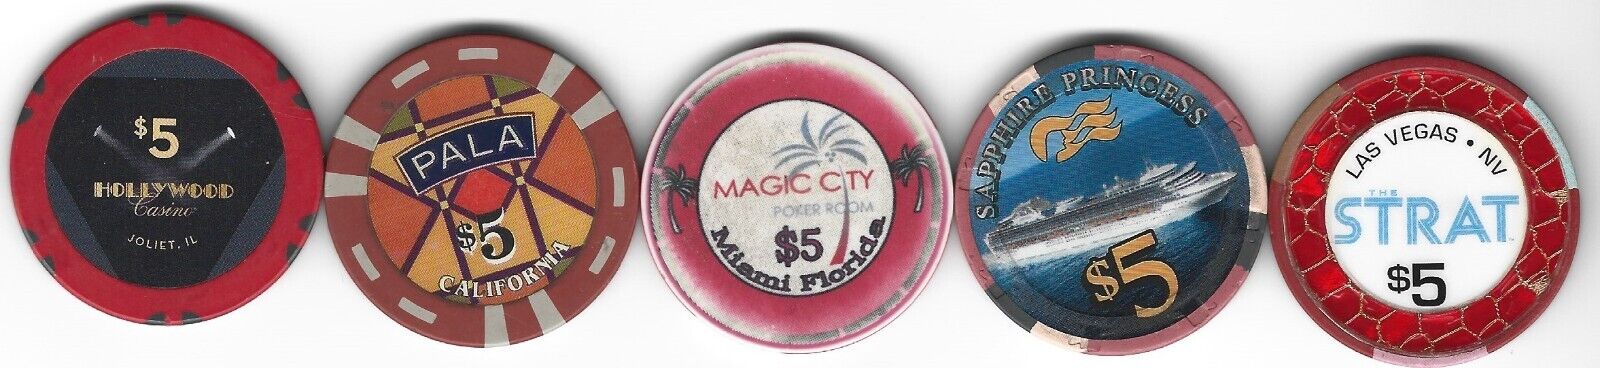 FIVE $5 CASINO CHIPS FROM CASINO ALL OVER-SOME NEW, SOME OLD